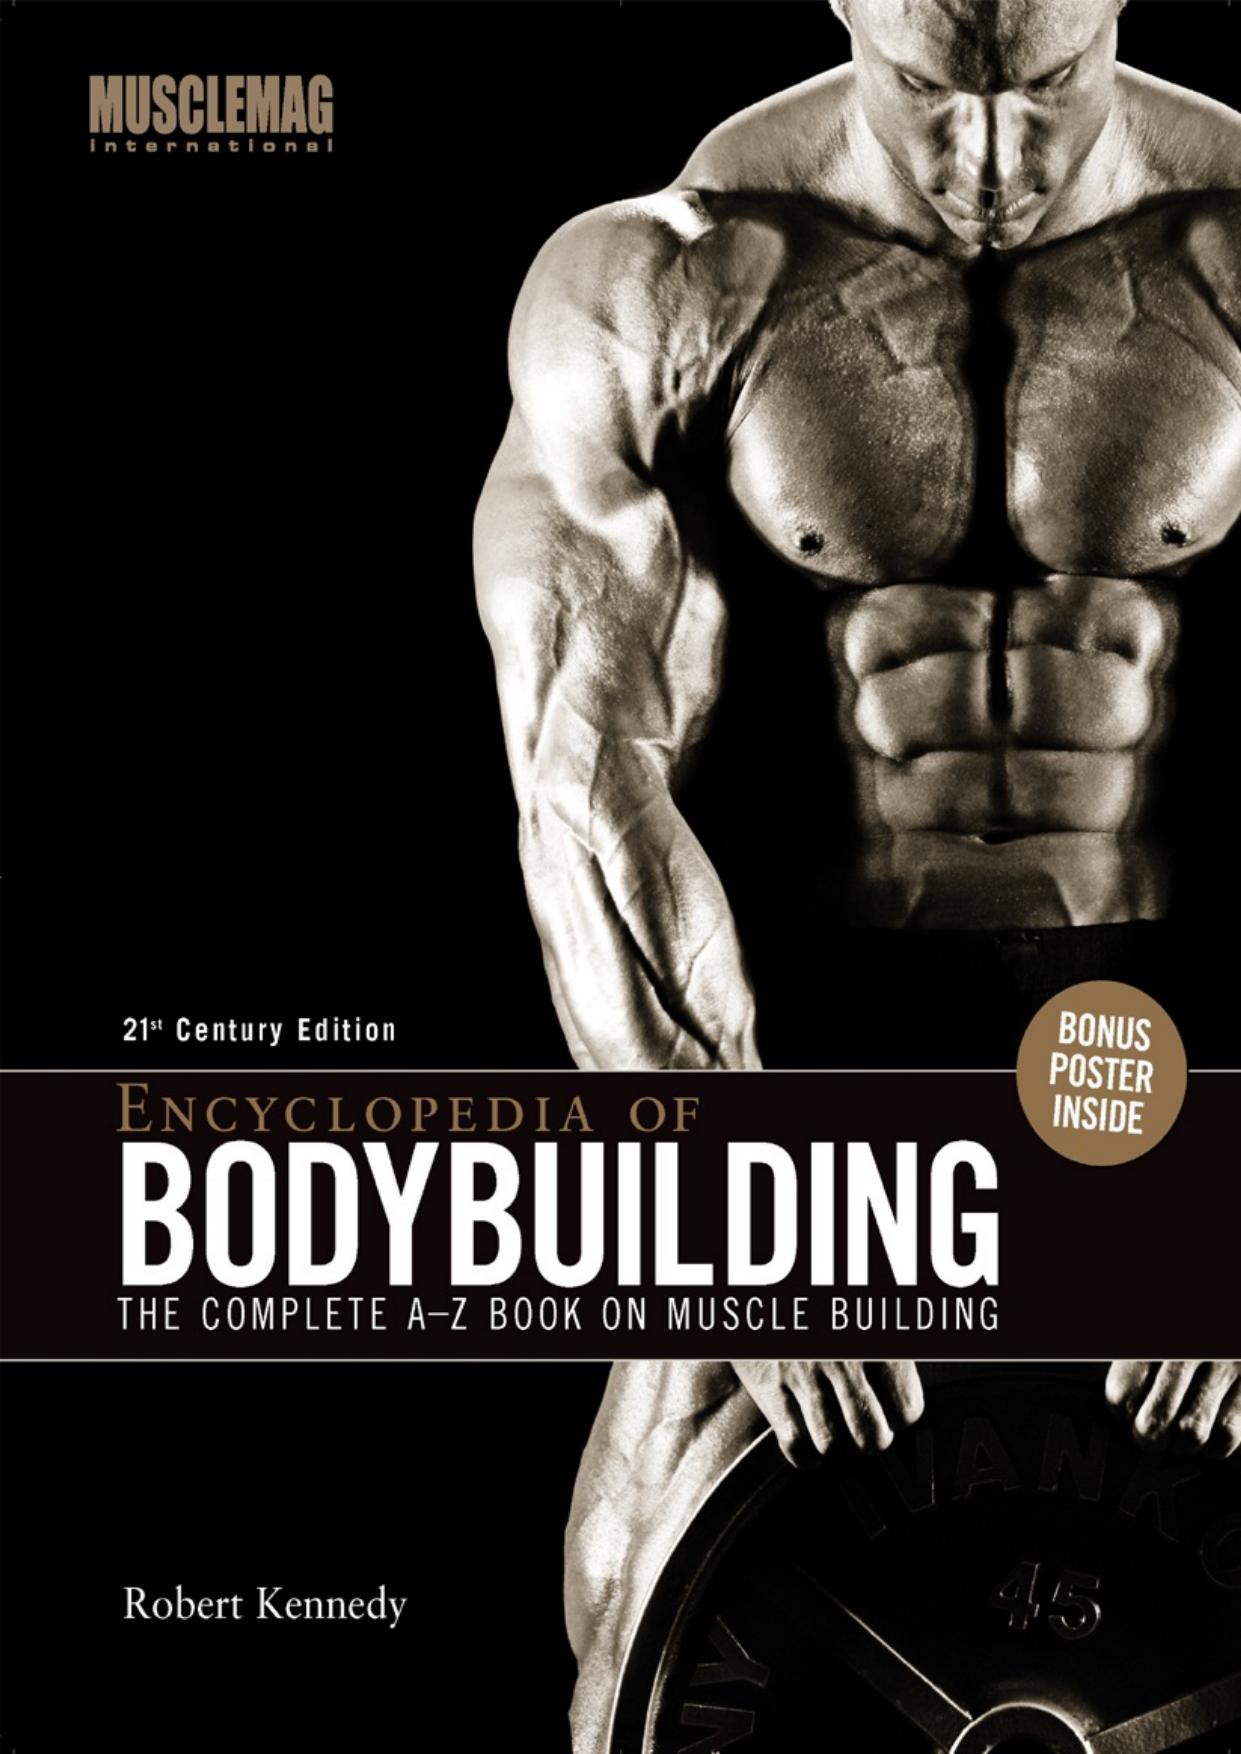 Encyclopedia of Bodybuilding: The Complete A-Z Book on Muscle Building Hardcover by Robert Kennedy